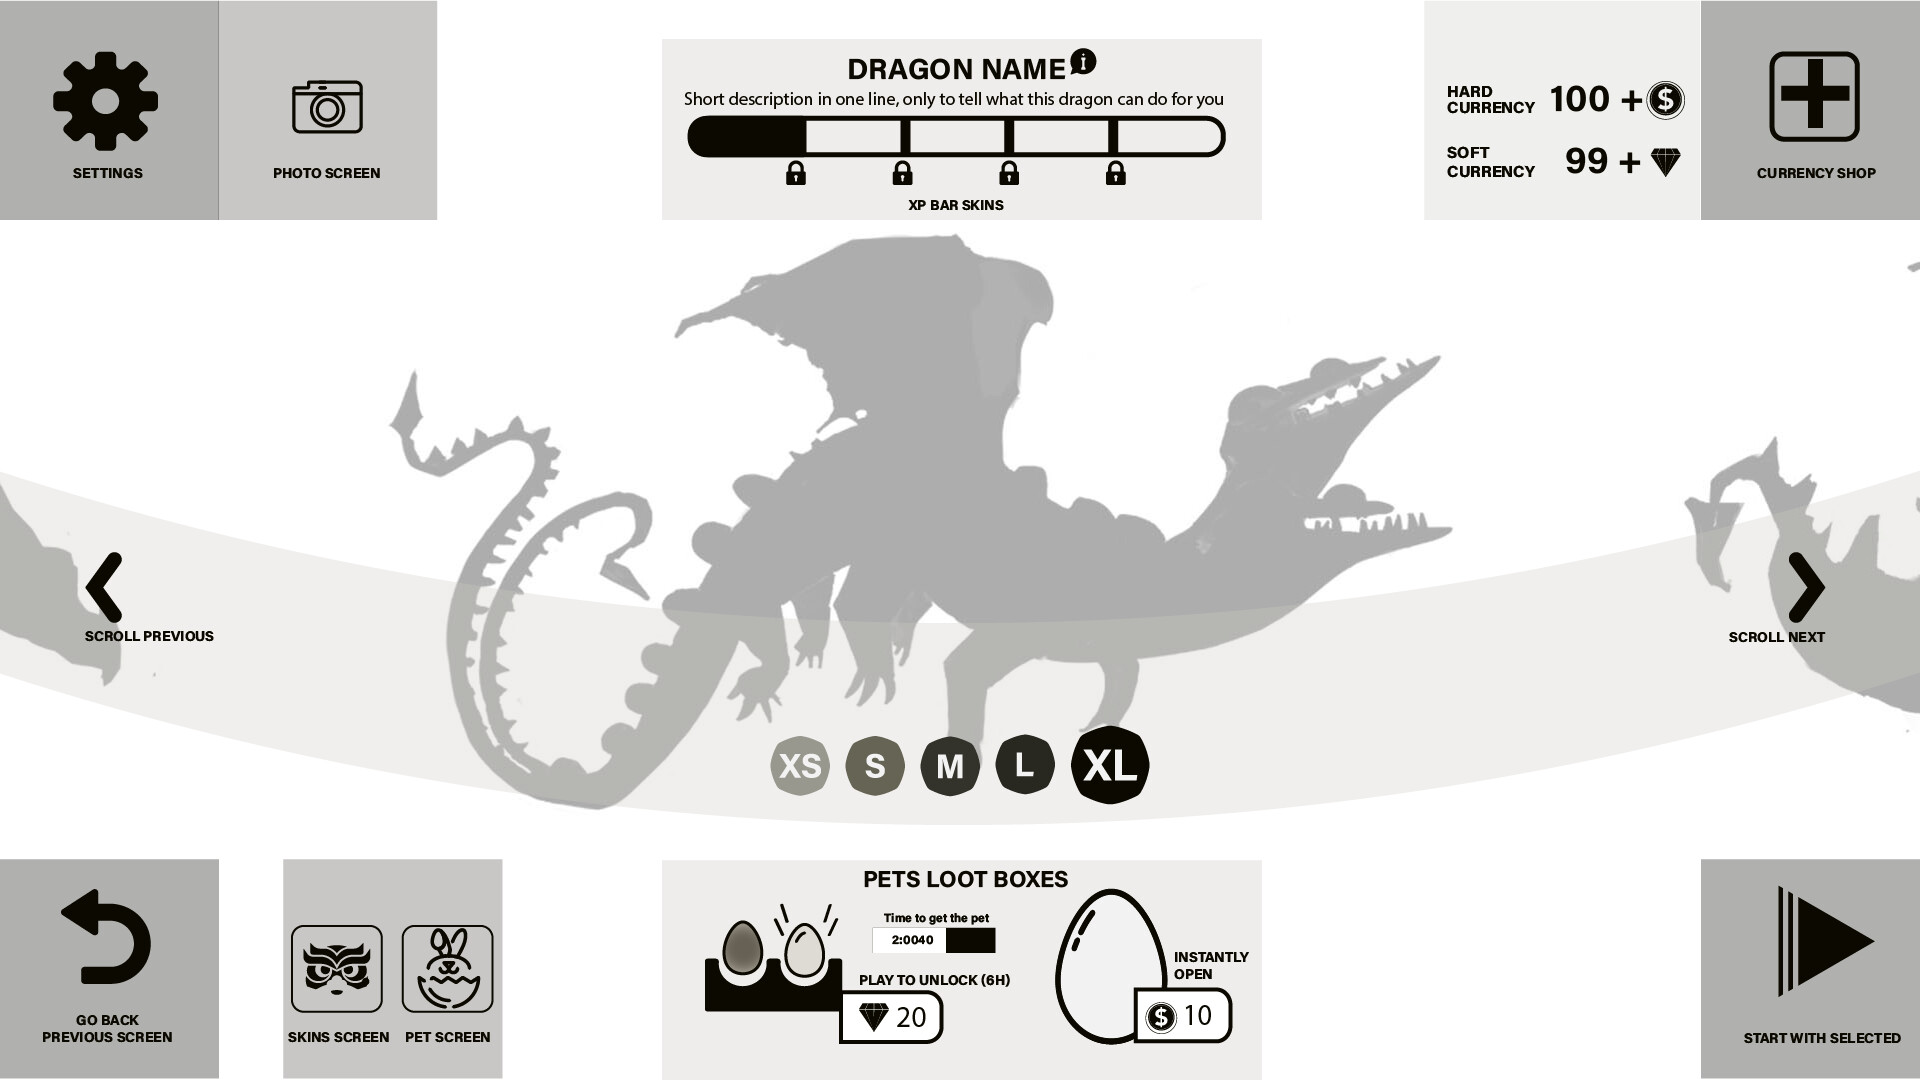 Hungry Dragon, Software